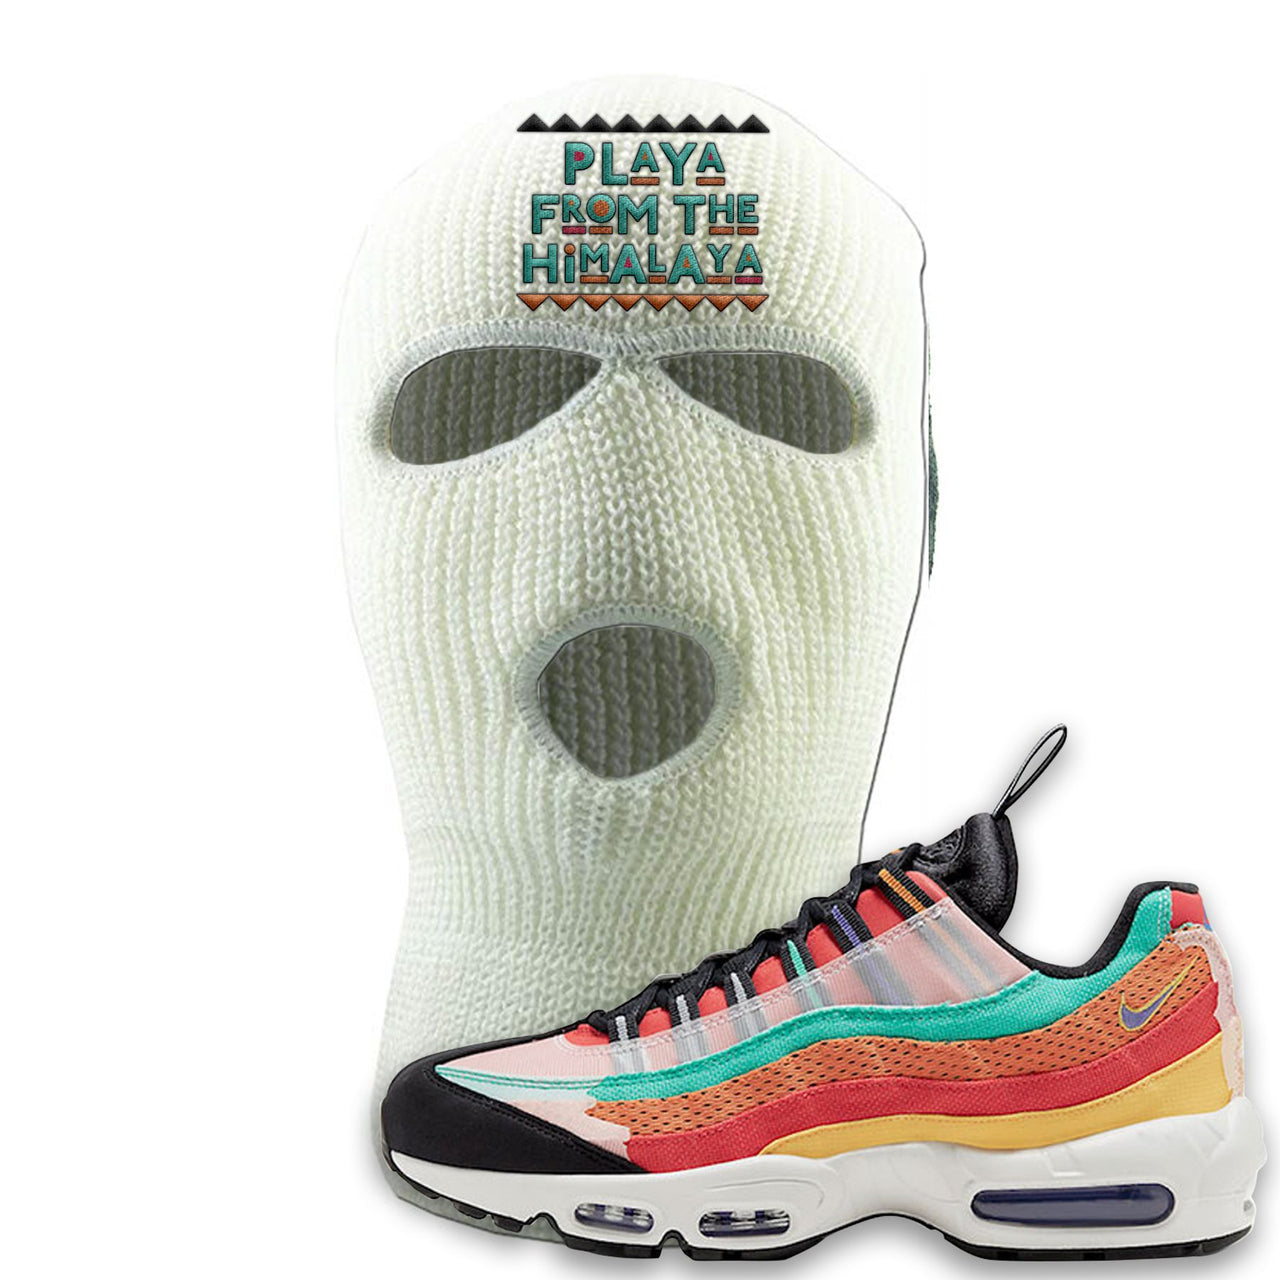 Air Max 95 Black History Month Sneaker White Ski Mask | Winter Mask to match Air Max 95 Black History Month Shoes | Playa From The Himalaya